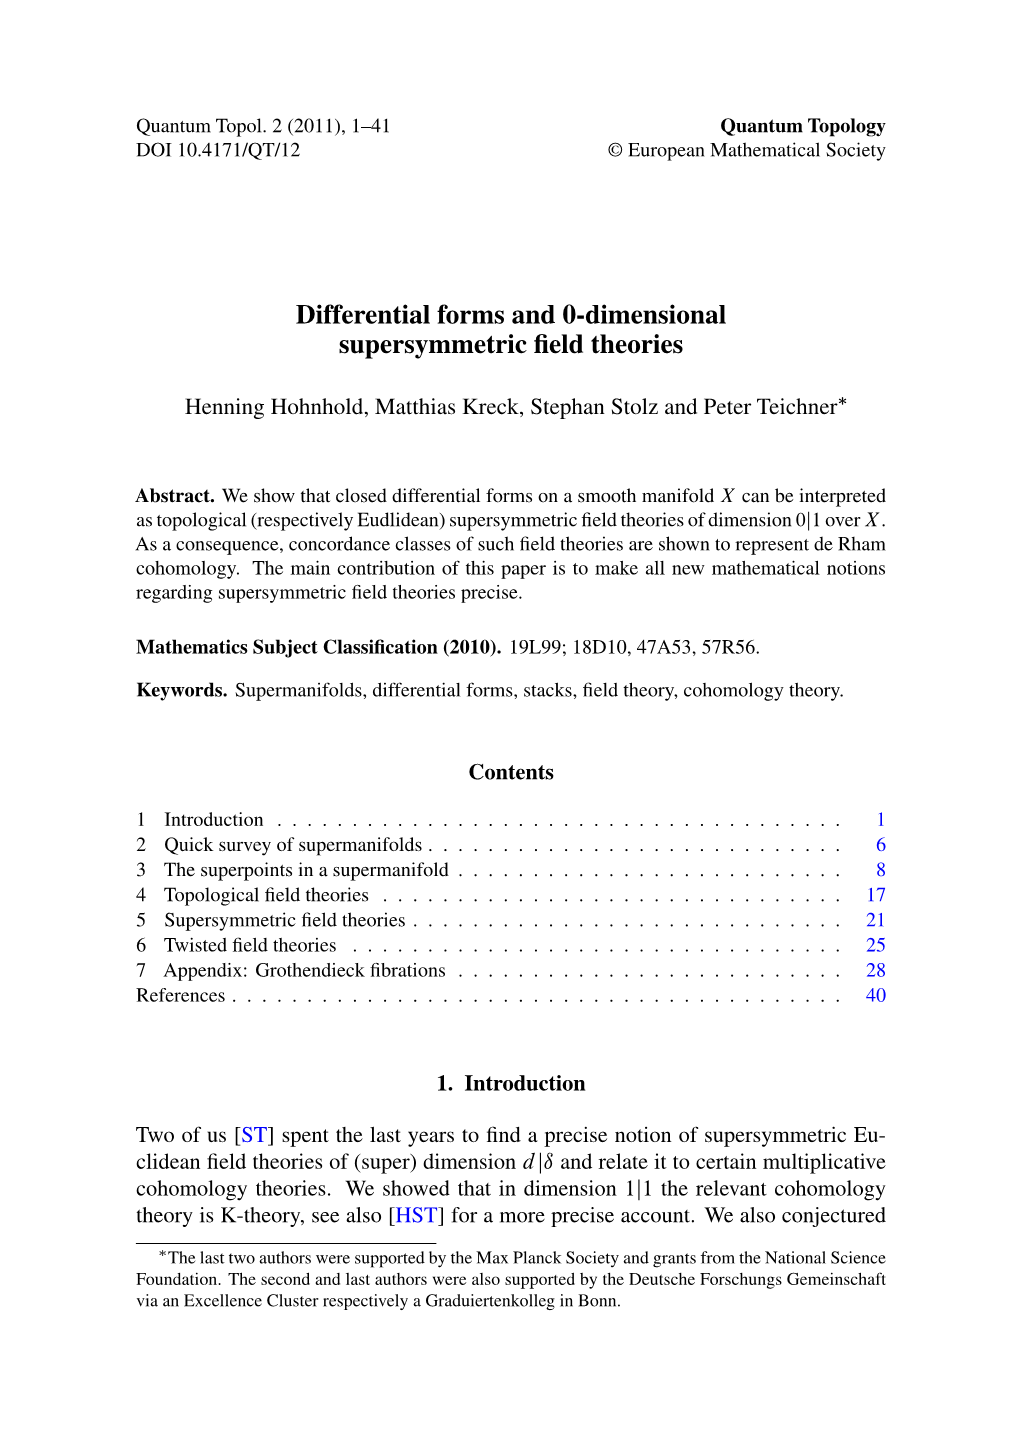 Differential Forms and 0-Dimensional Supersymmetric Field Theories